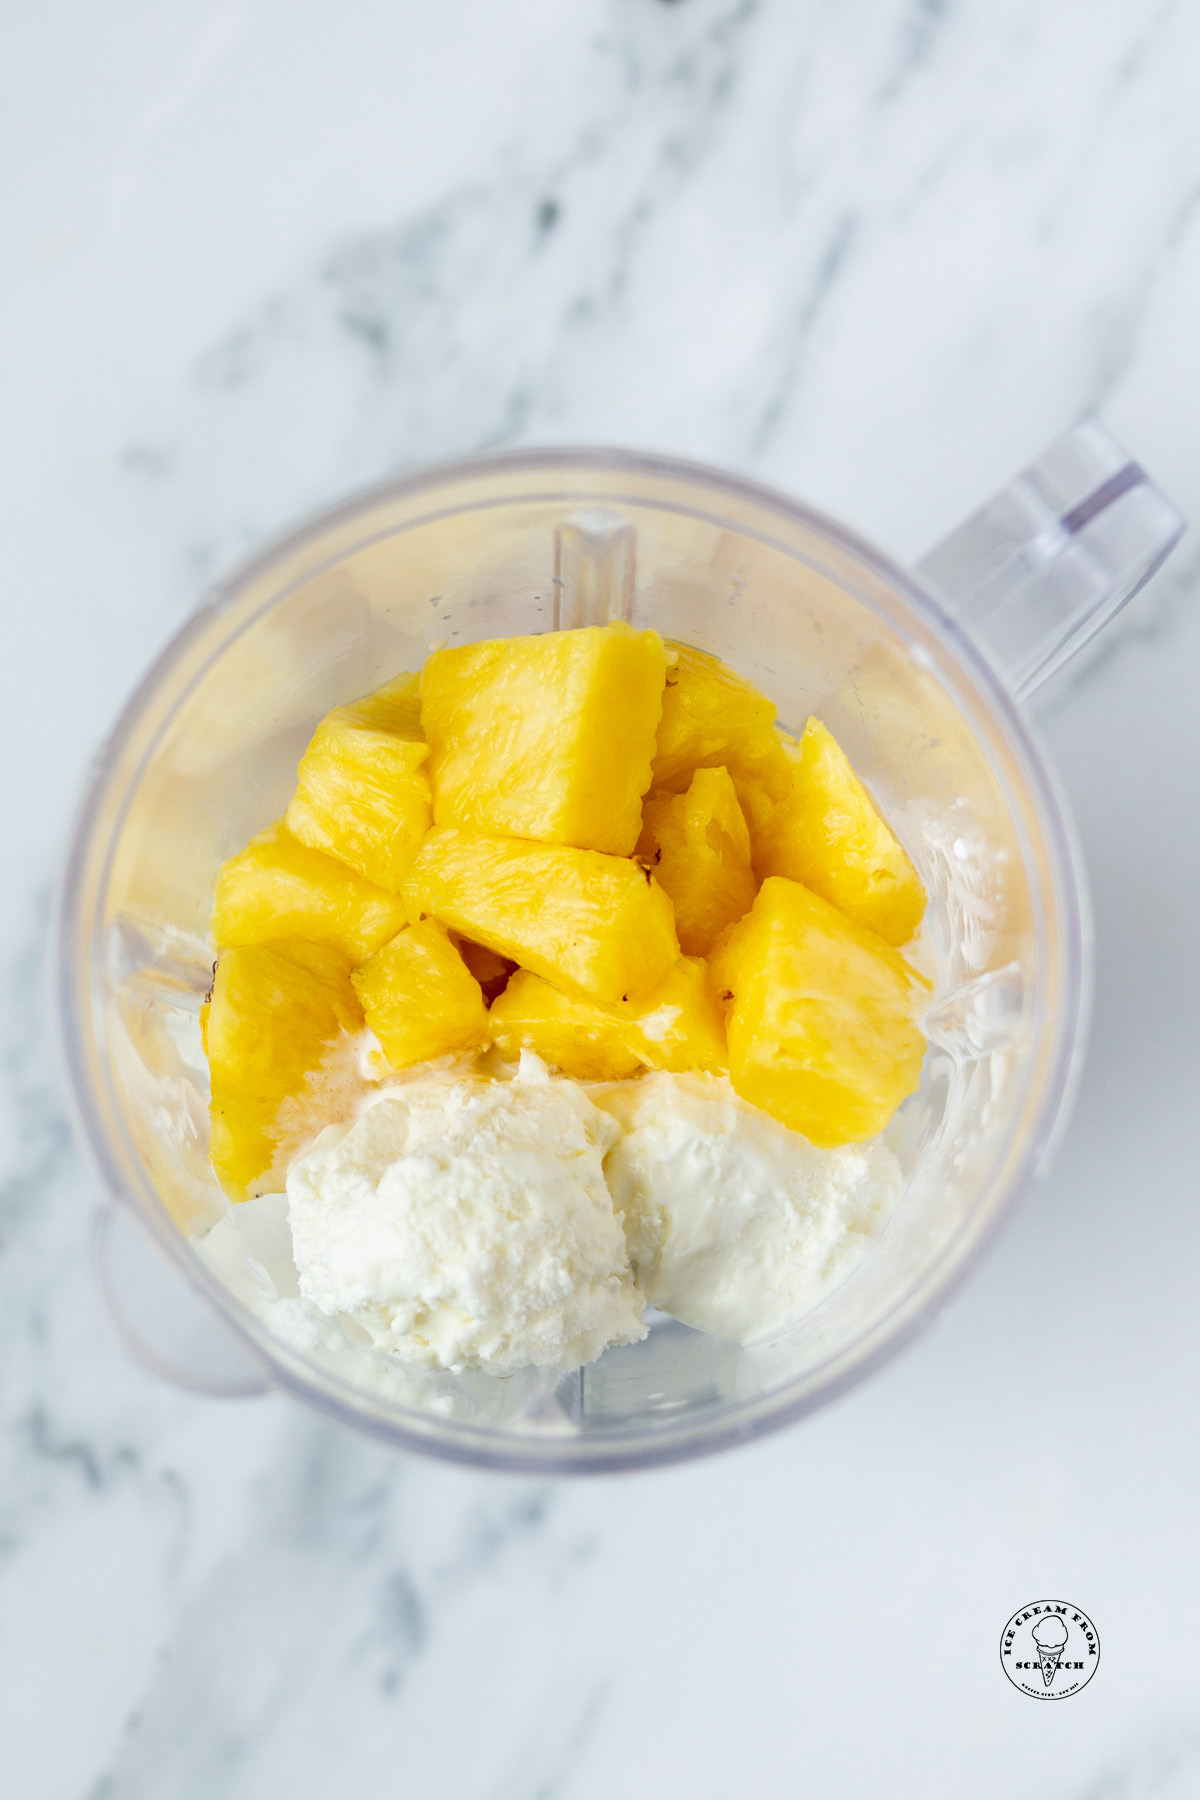 Pineapple pieces and vanilla ice cream in a blender, viewed from overhead